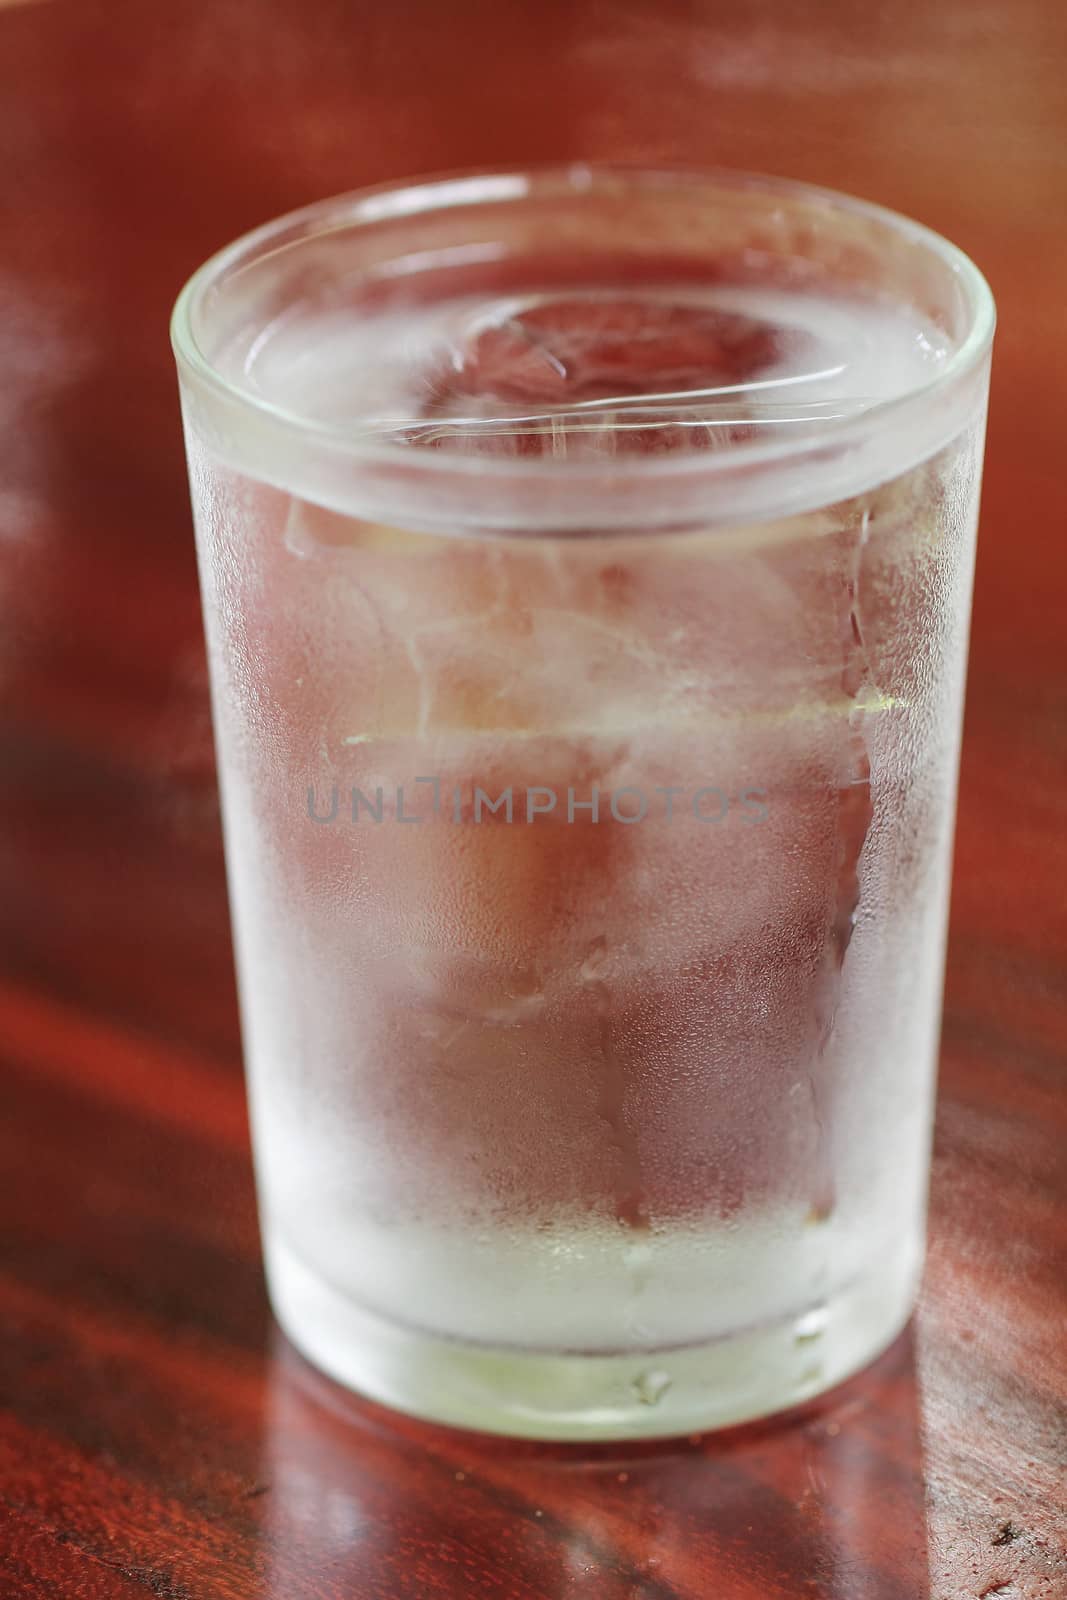 Glass of clean water with ice